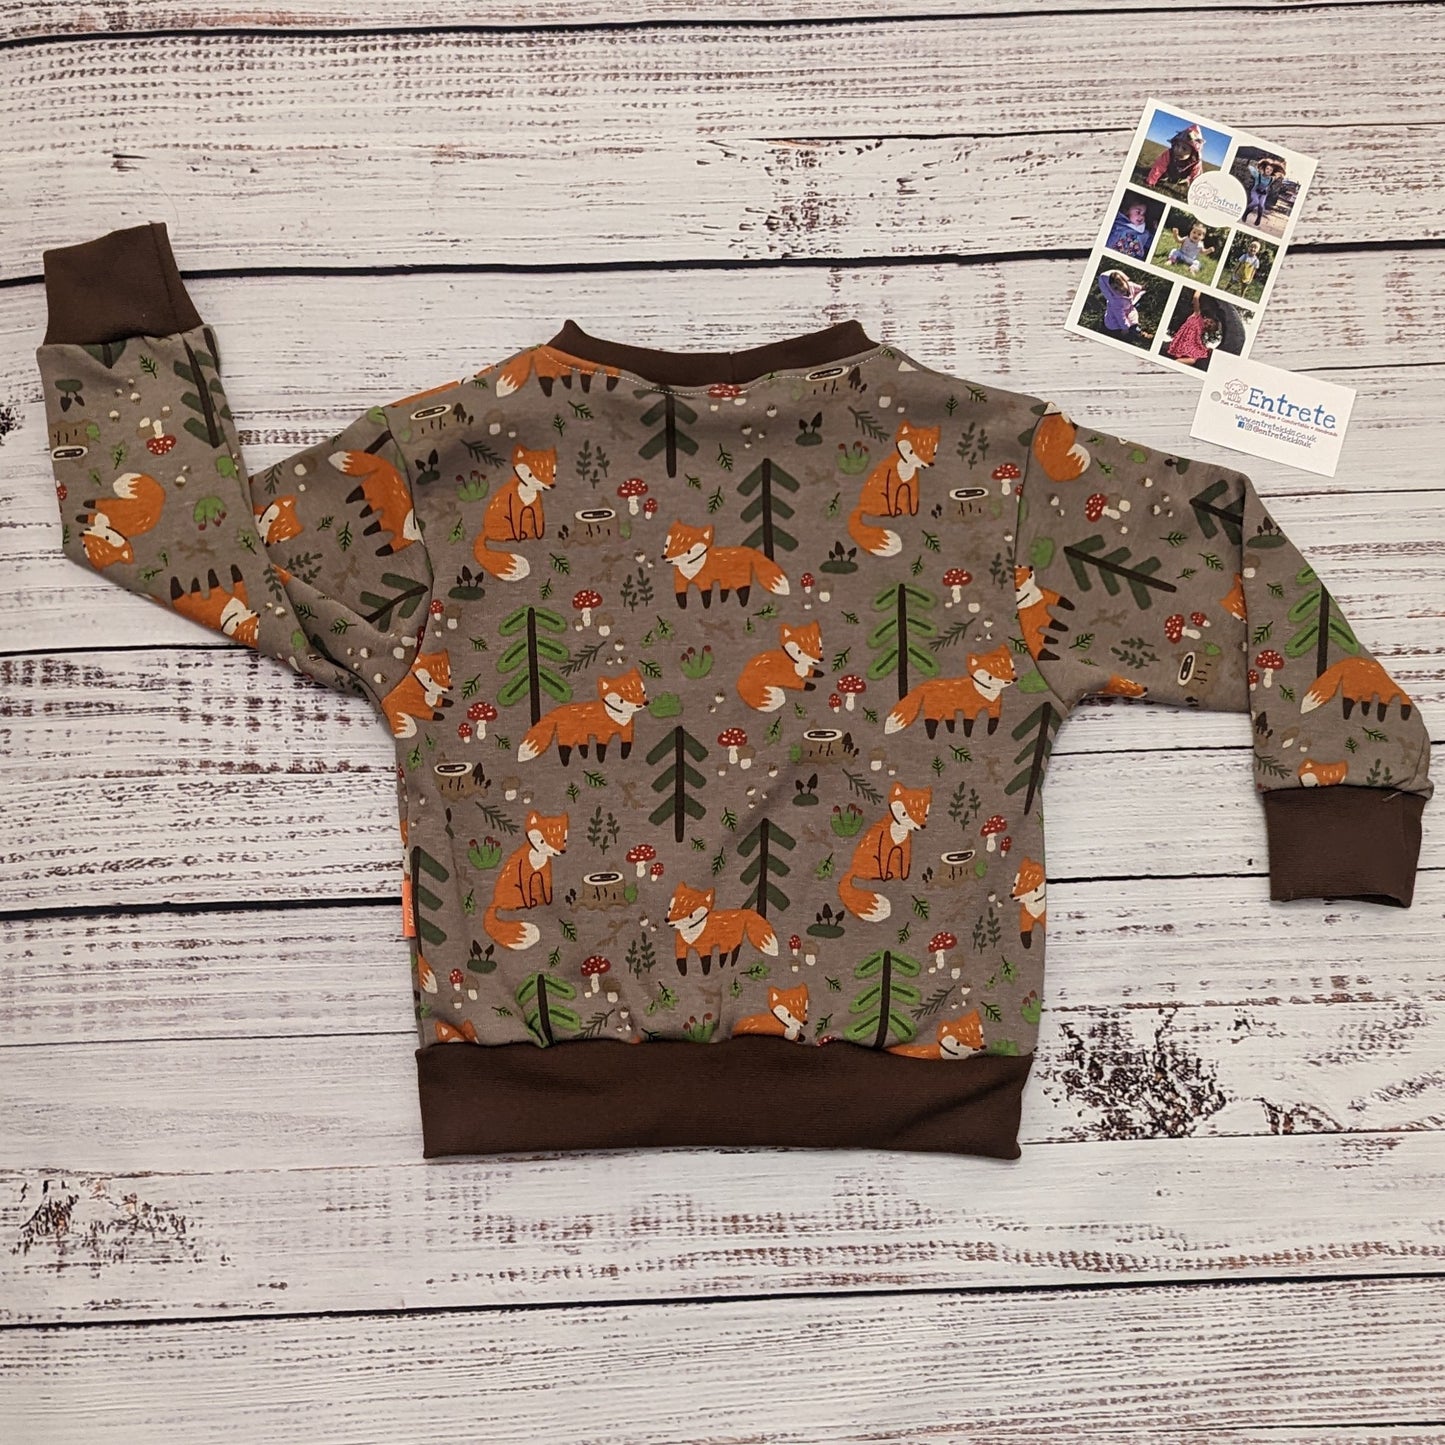 The warm, sumptuously soft and fun forest foxes sweatshirt. Handmade using brown forest foxes alpine fleece and brown cotton ribbing. Shown from the rear.